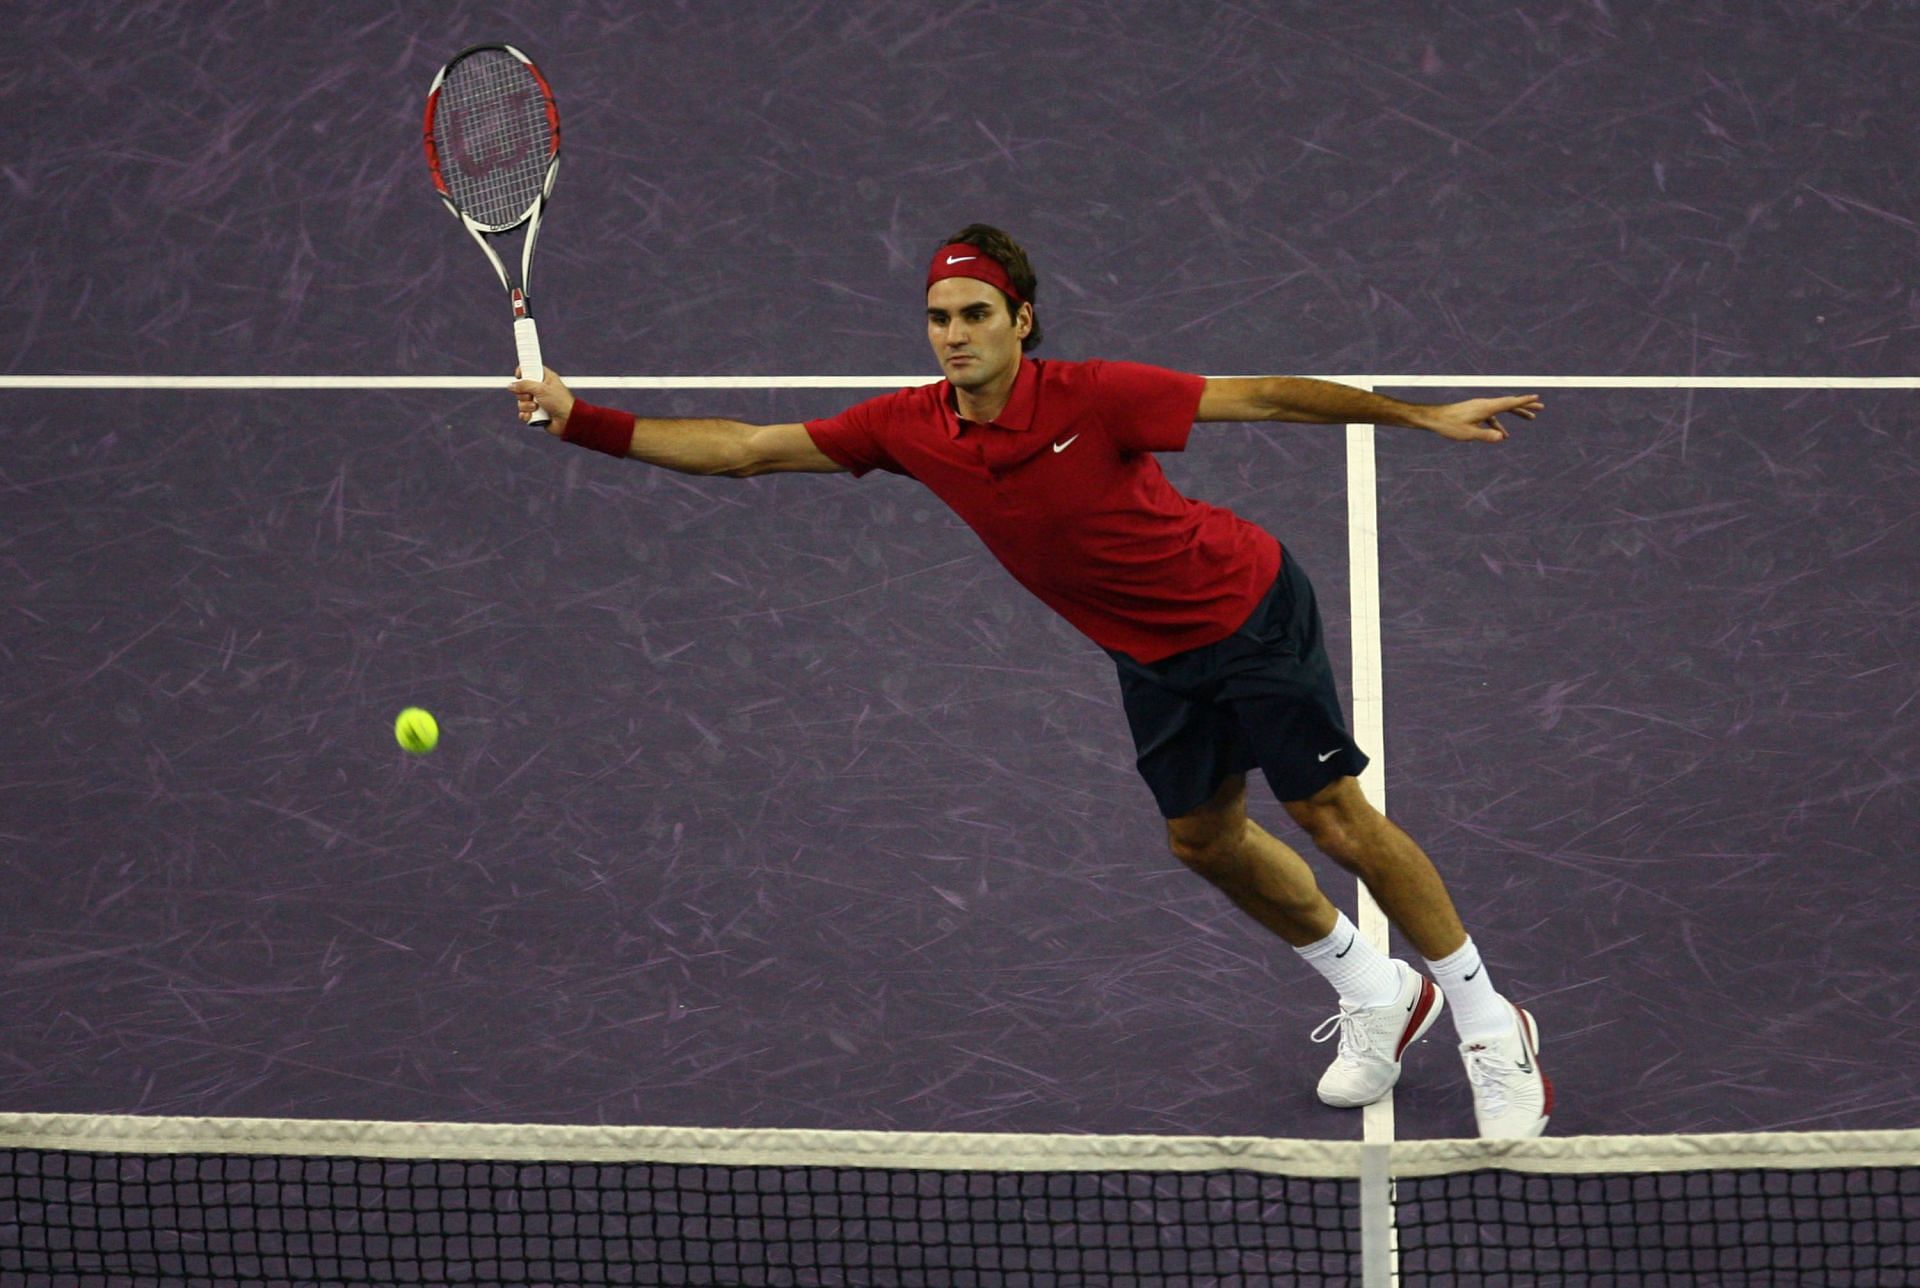 Roger Federer in action in the semifinals of the Tennis Masters Cup in Shanghai in 2009